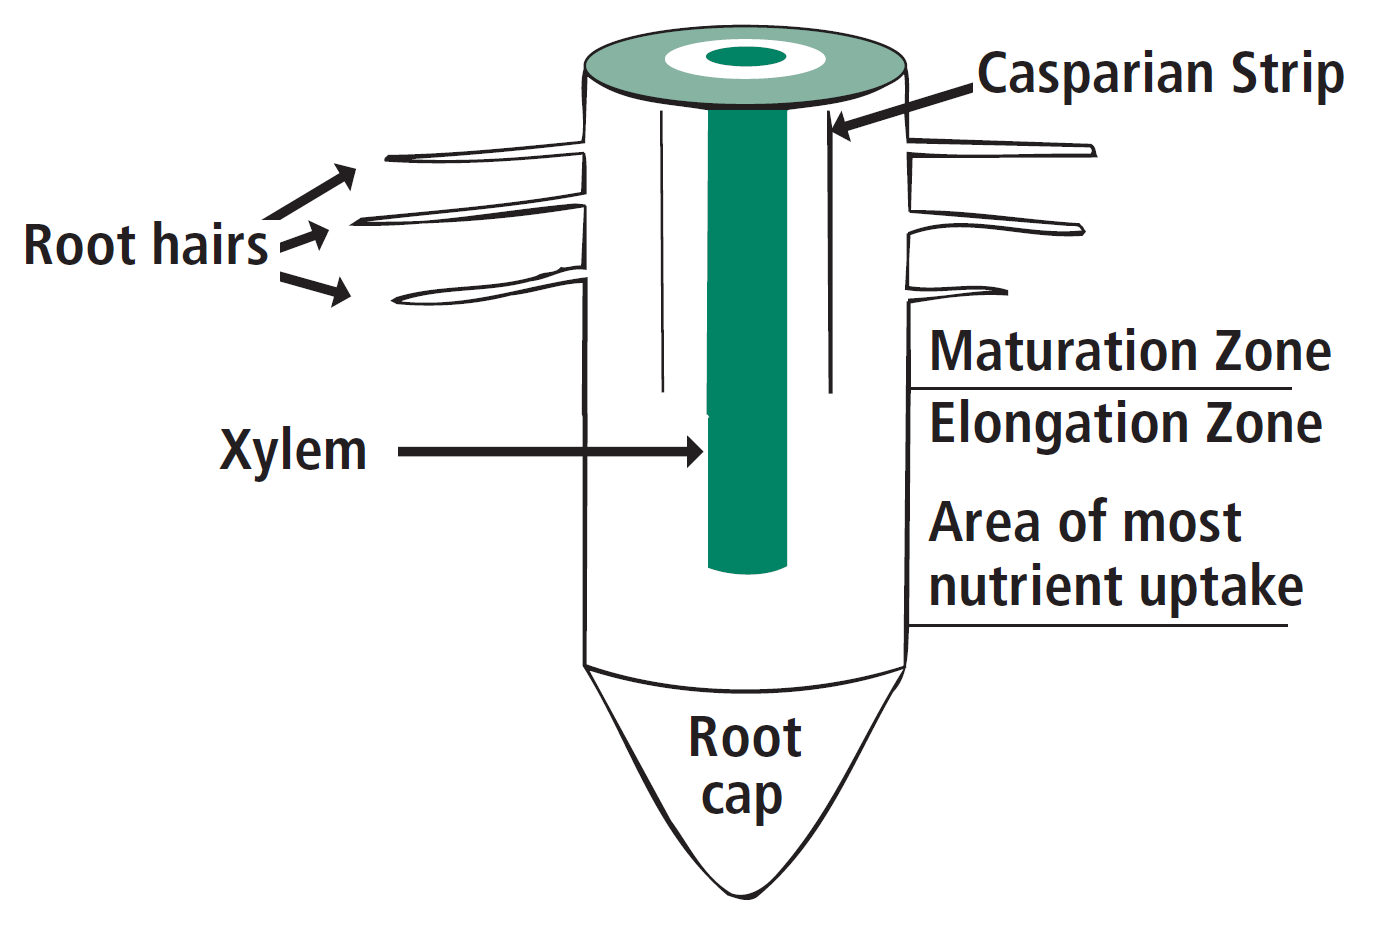 Cross-section diagram of the tip of a plant root. The elongation zone near the root cap provides the most nutrient uptake